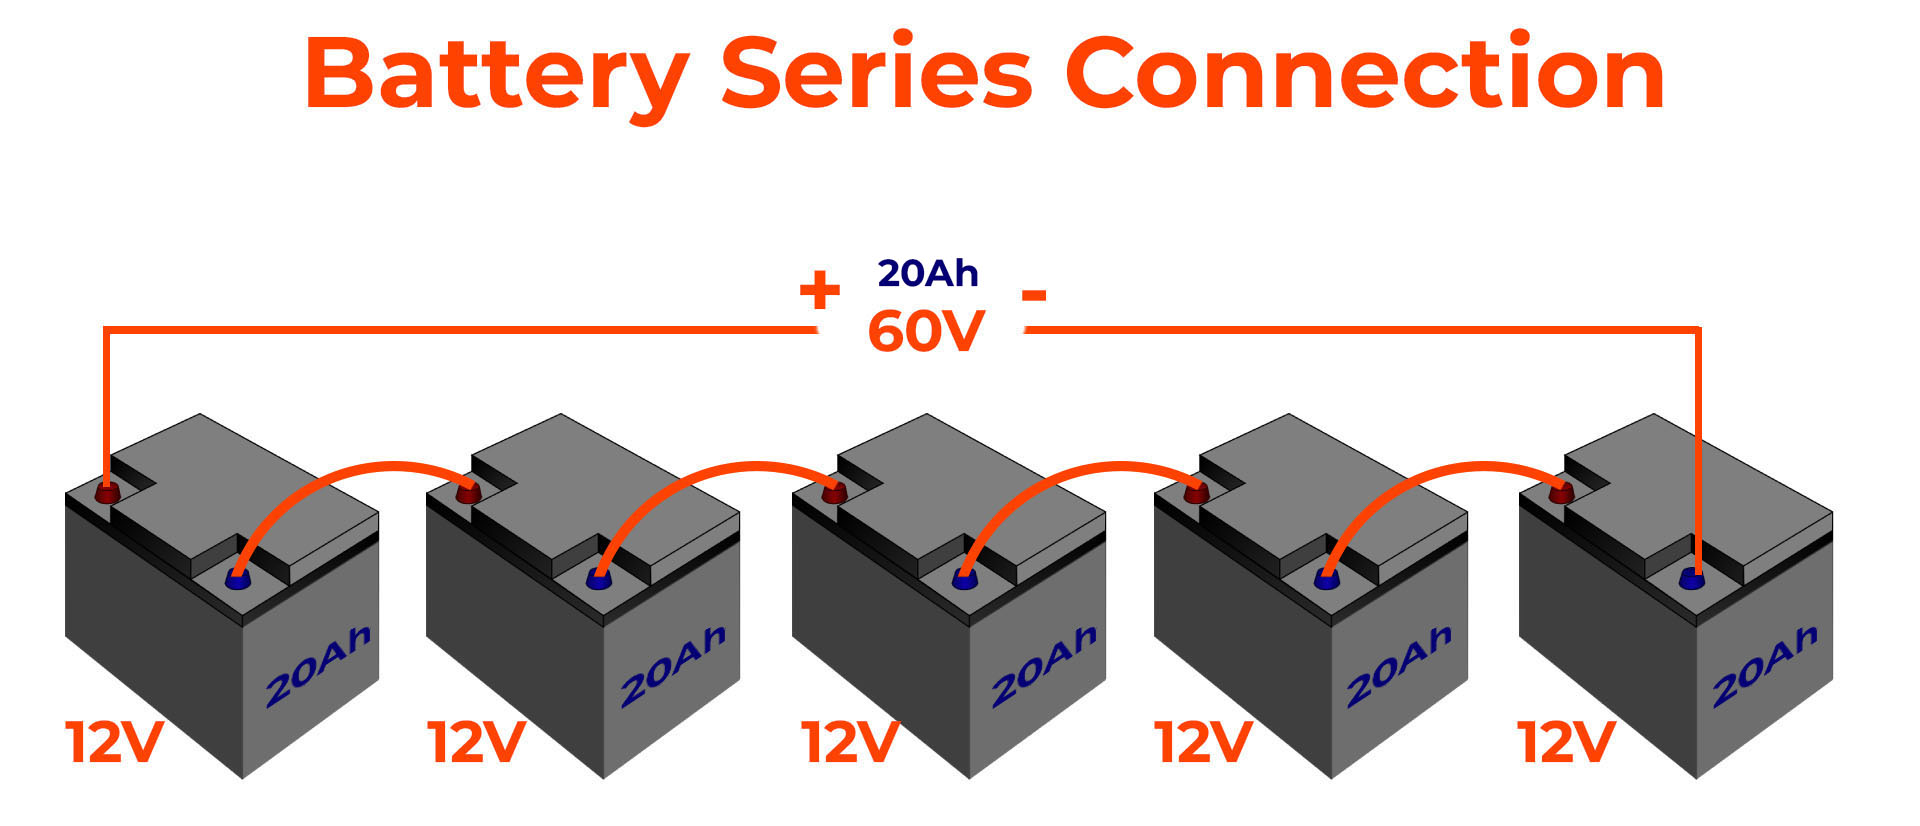 Batteries in Series Connection